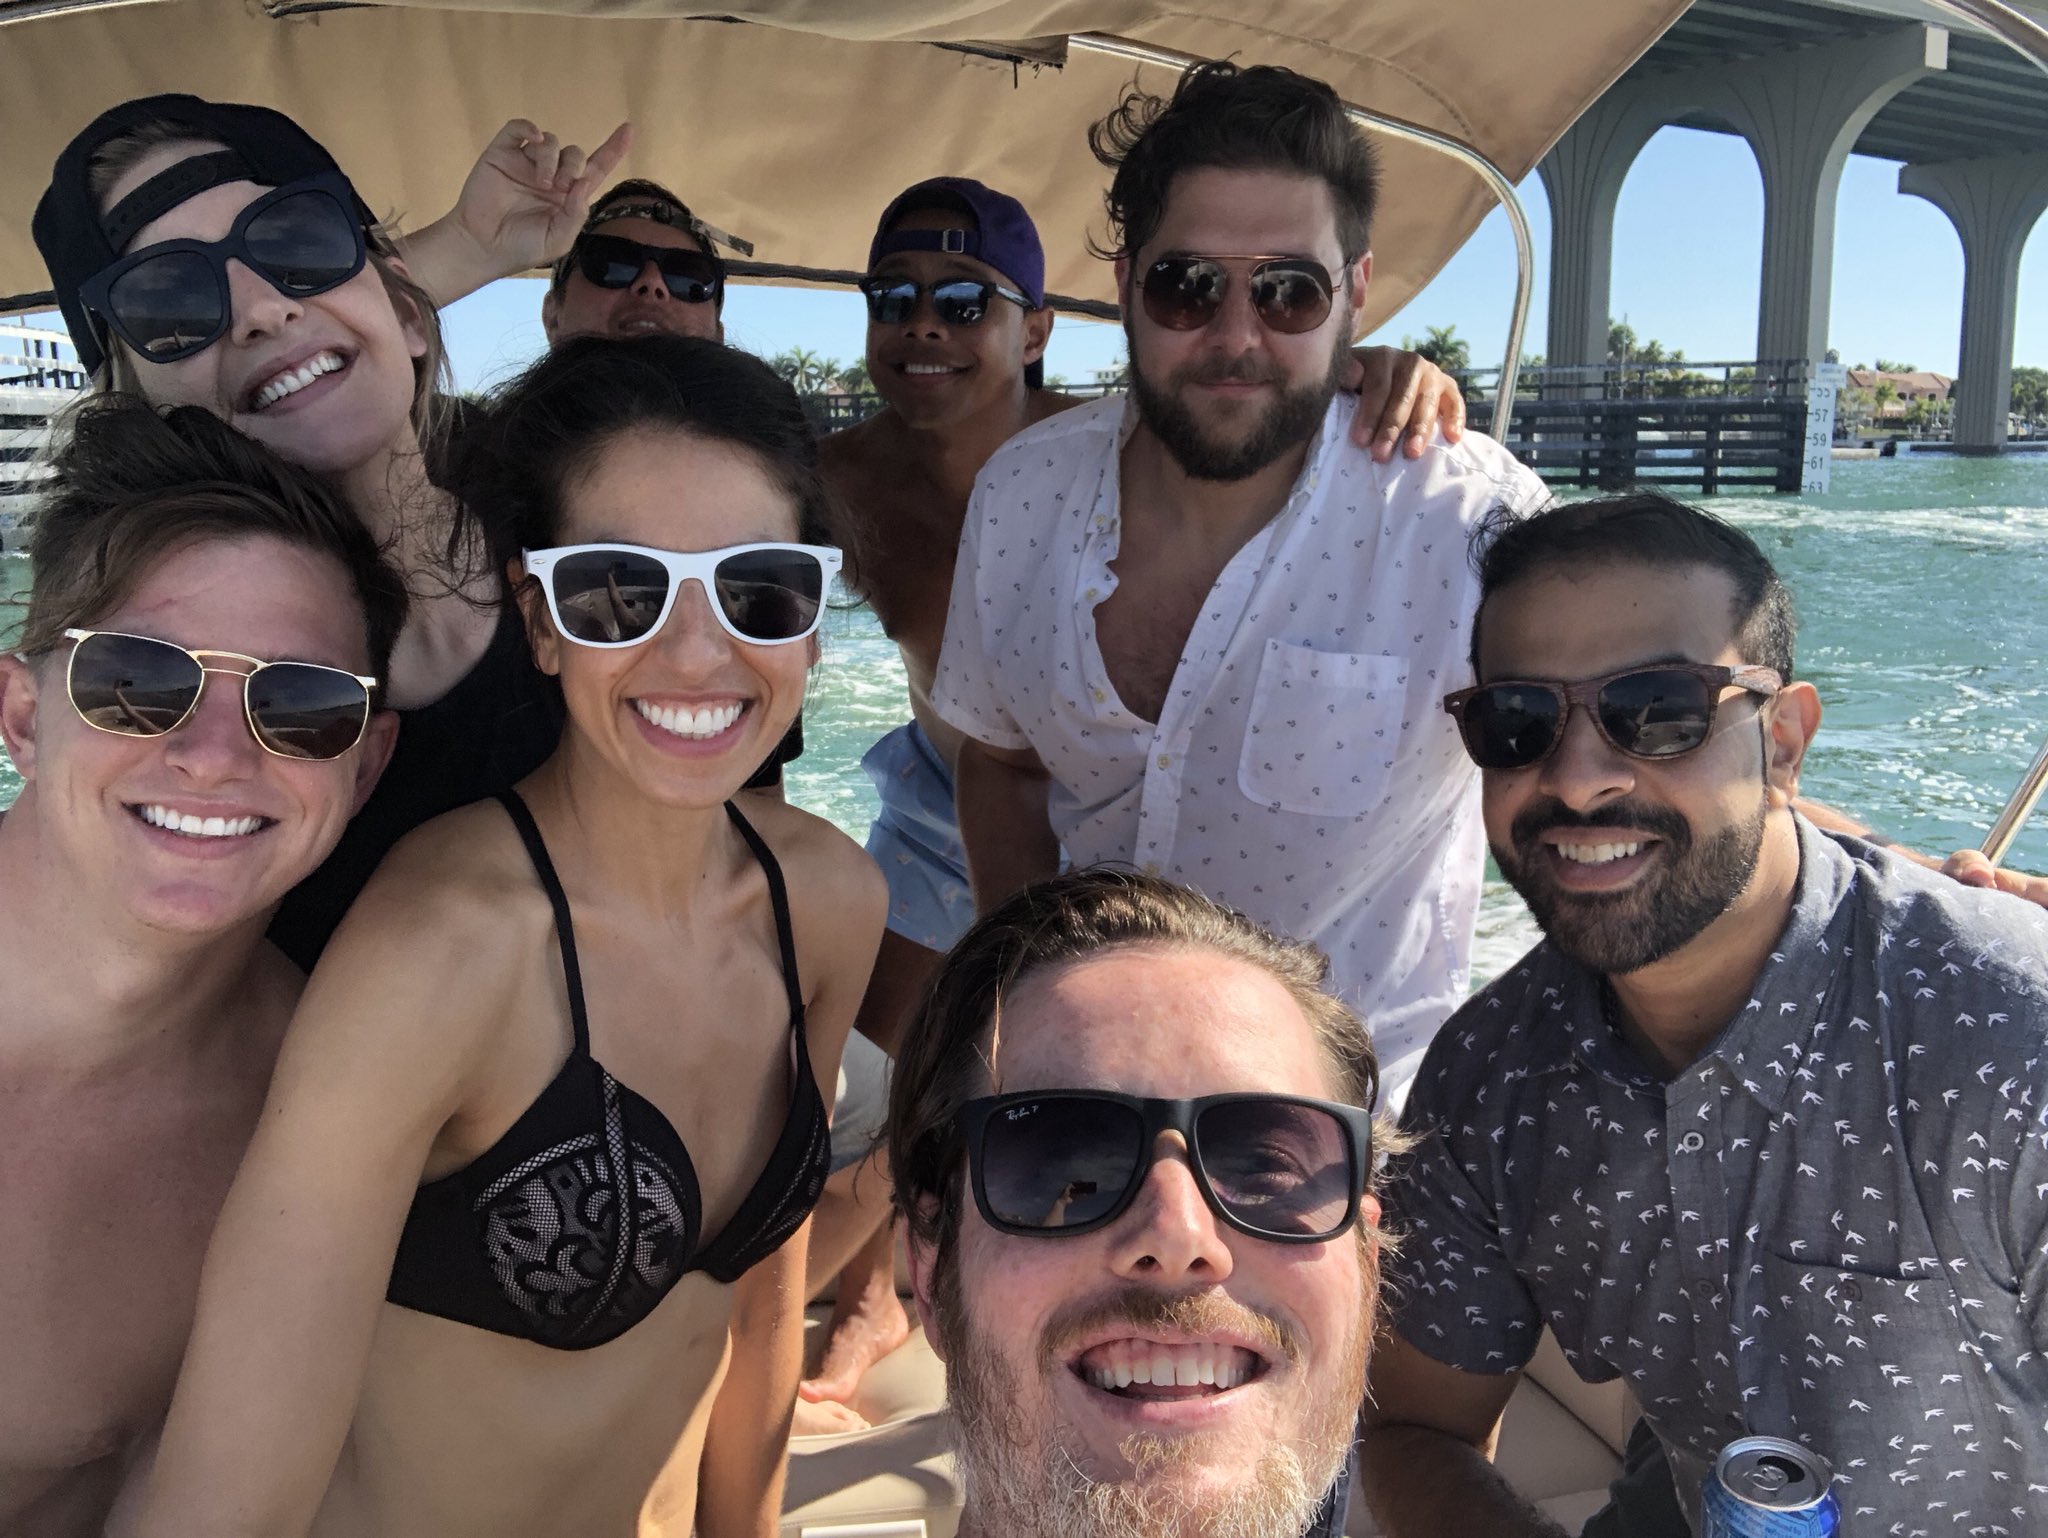 Hummel on X: "Casual donuts in the bay makes you douchebags of the sea. Happy birthday Kev!! #BoatDay #StPete #BlessedAF 🚤🌊☀️@home_made_man https://t.co/P6TA37qTqi" / X